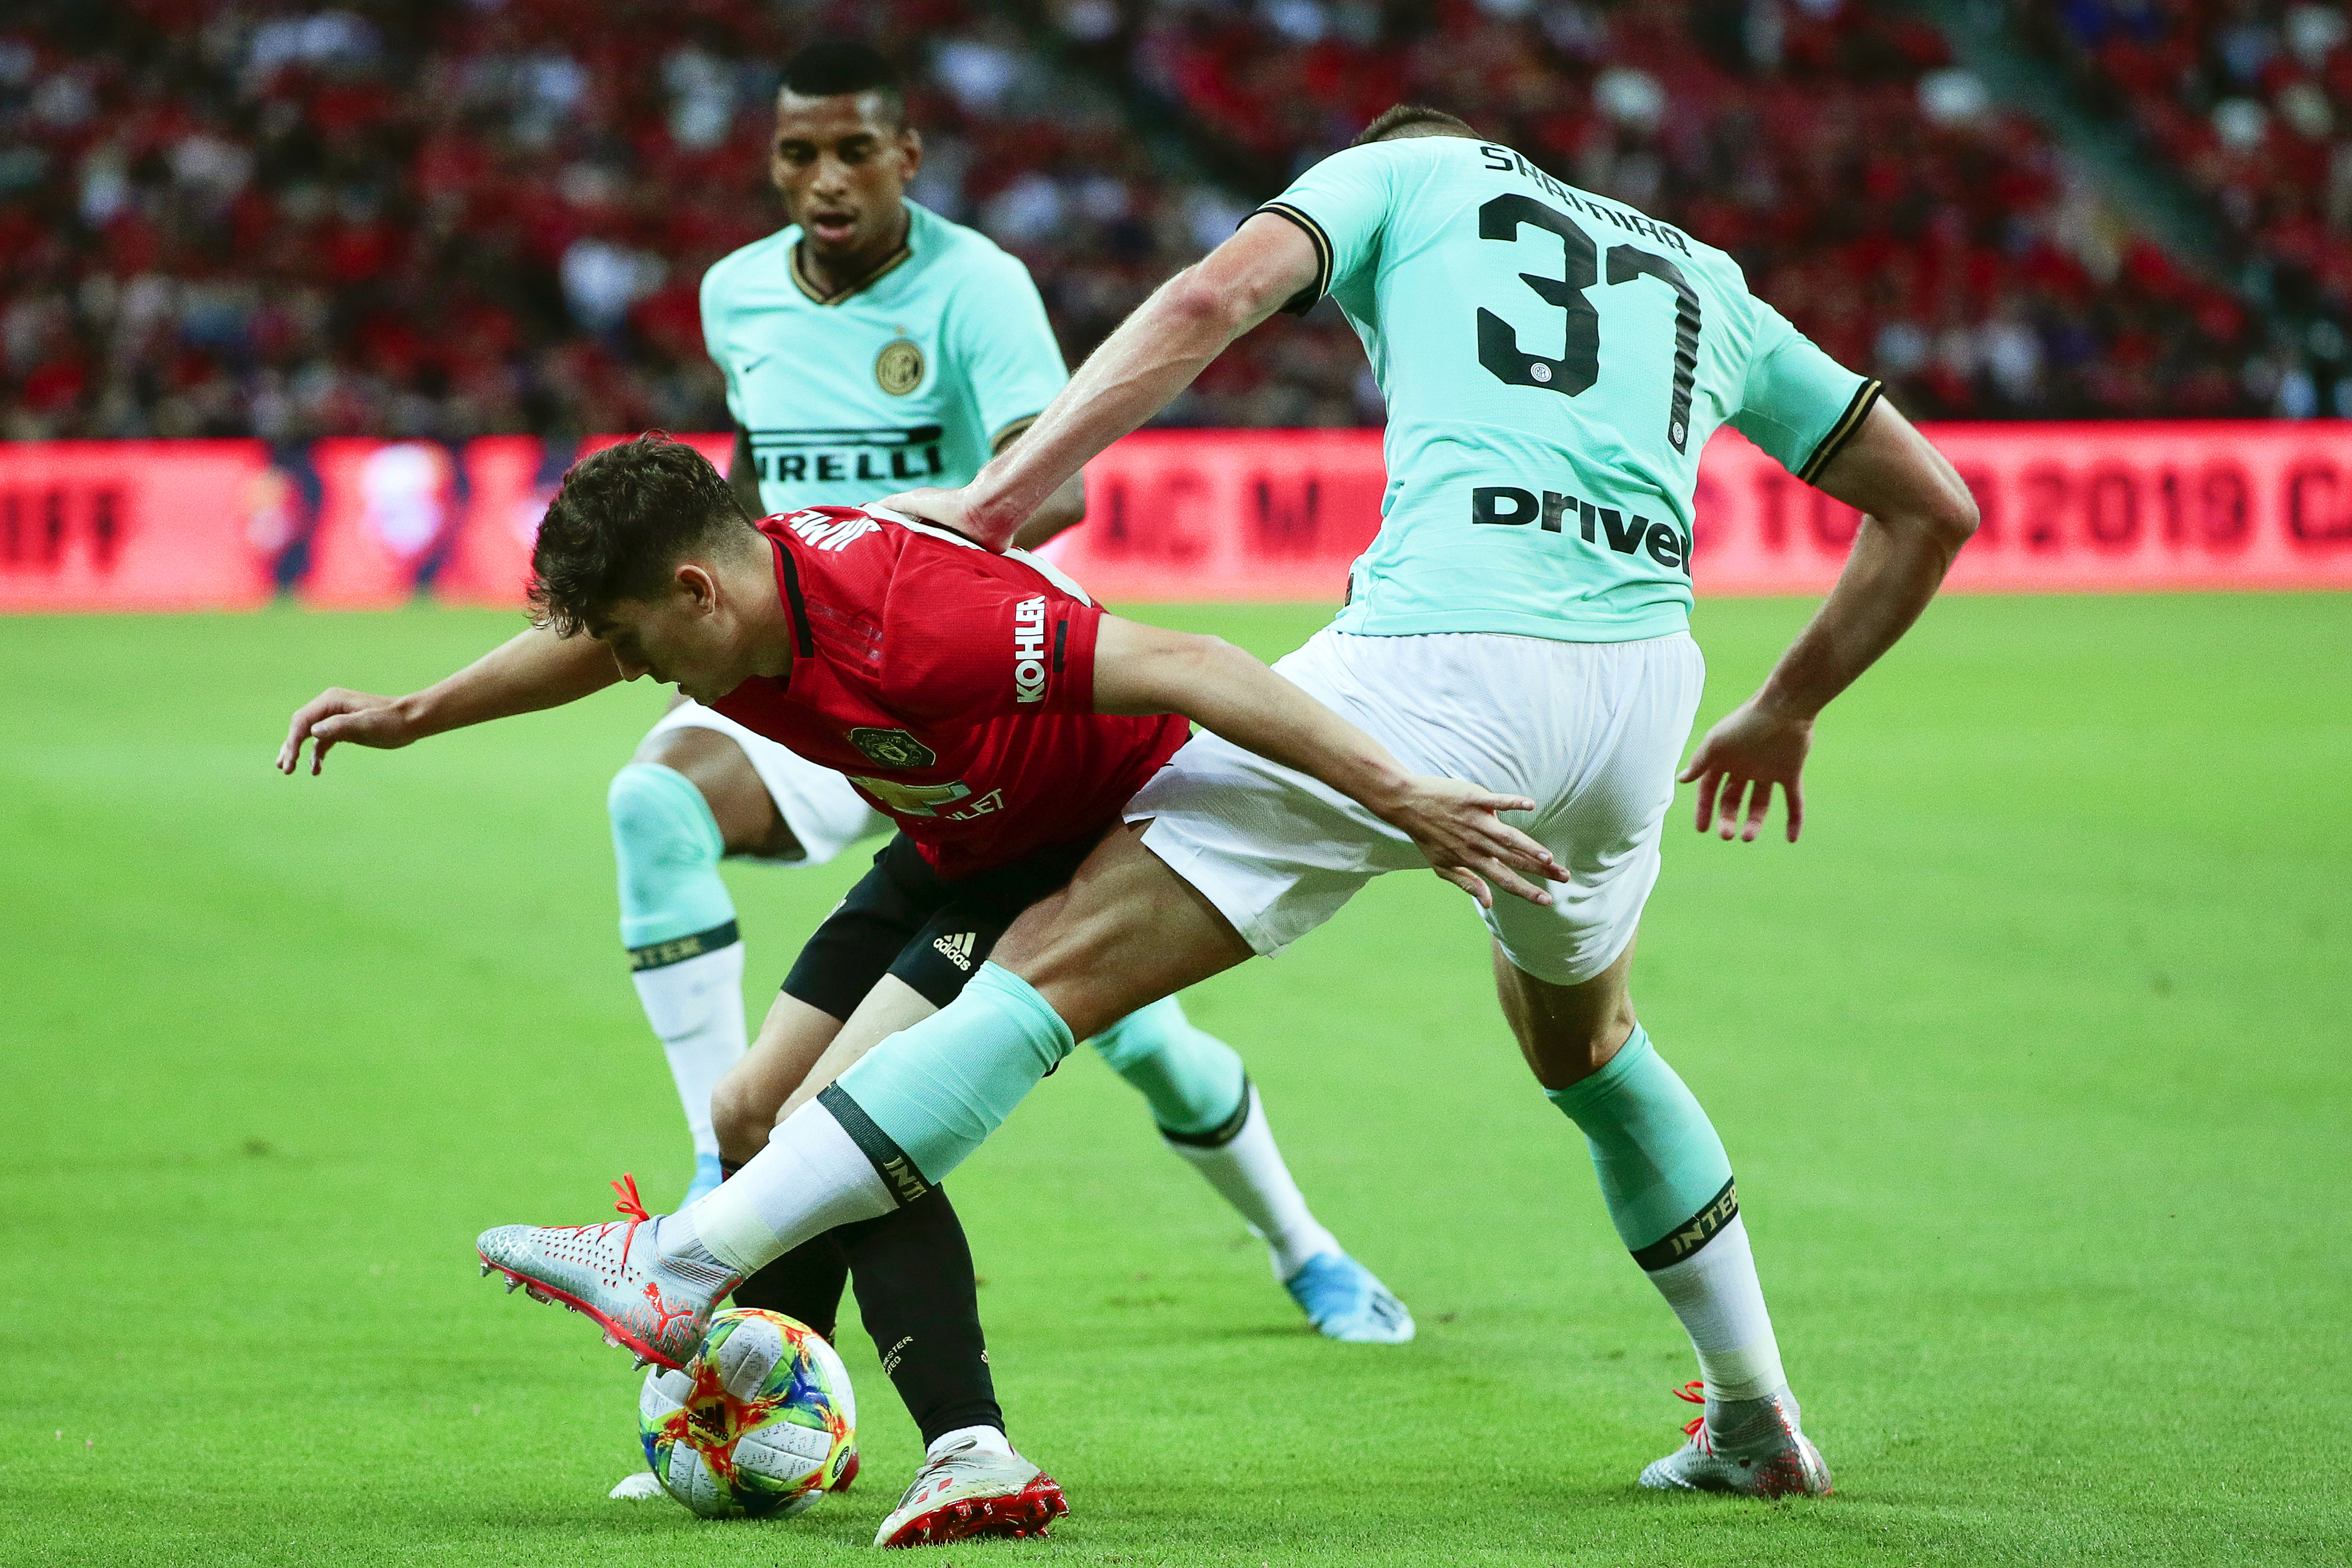 epa07729089 Inter's Milan Skriniar (R) in action against Manchester United's Daniel James (L) during the International Champions Cup soccer match between Manchester United and Inter Milan at the National Stadium in Singapore, 20 July 2019.  EPA/WALLACE WOON